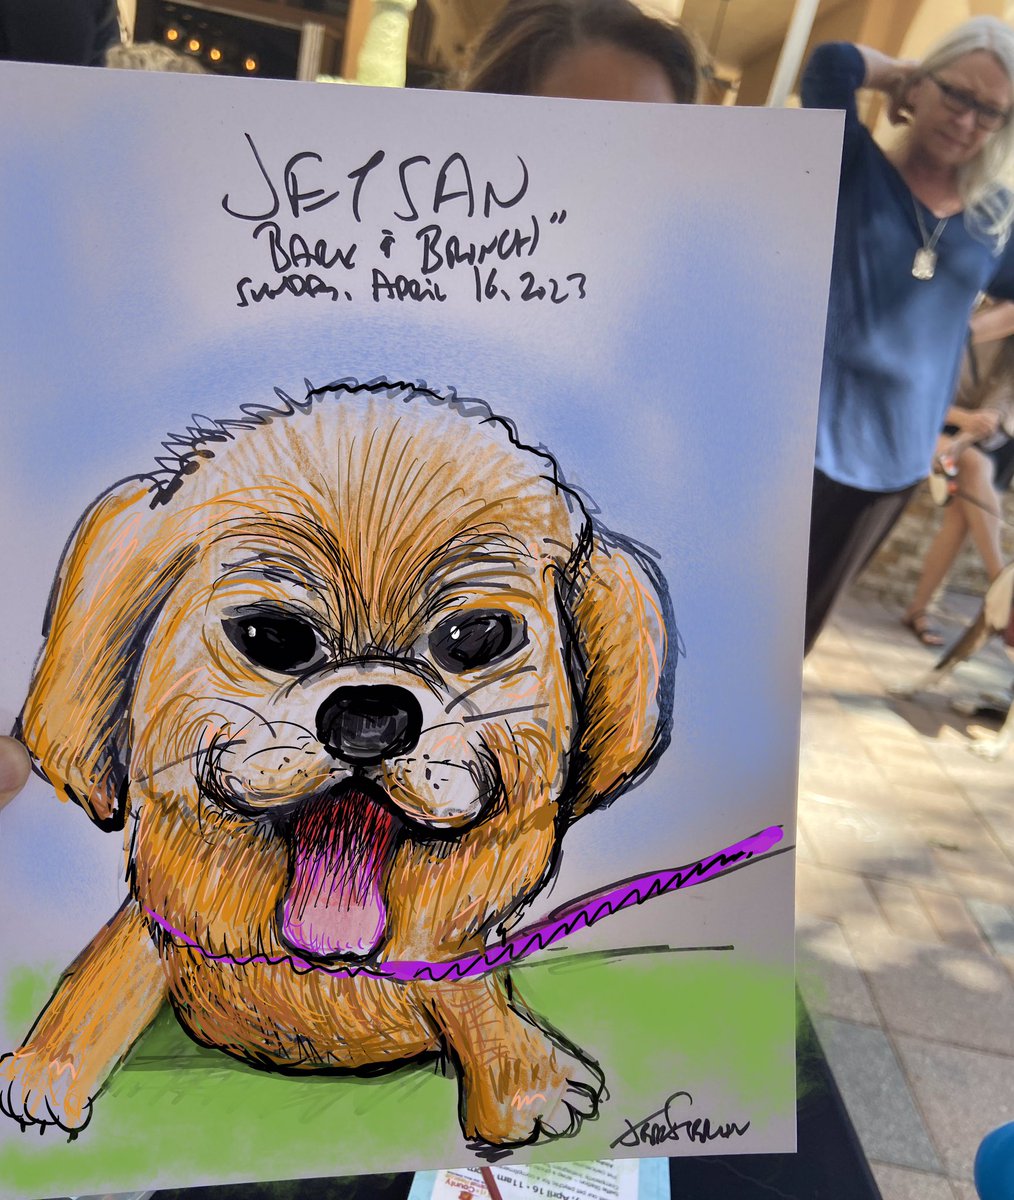 #PetLovers #DogLovers #CommunityEvent “Bark & Brunch” in #BoyntonBeachFlorida organizers booked #DogCaricatures #PetCaricatures by #DelrayBeach and #MiamiCaricatureArtist Jeff Sterling serving Miami to #WestPalmBeach. For artist availability 305-831-2195 FloridaCaricatures.Com